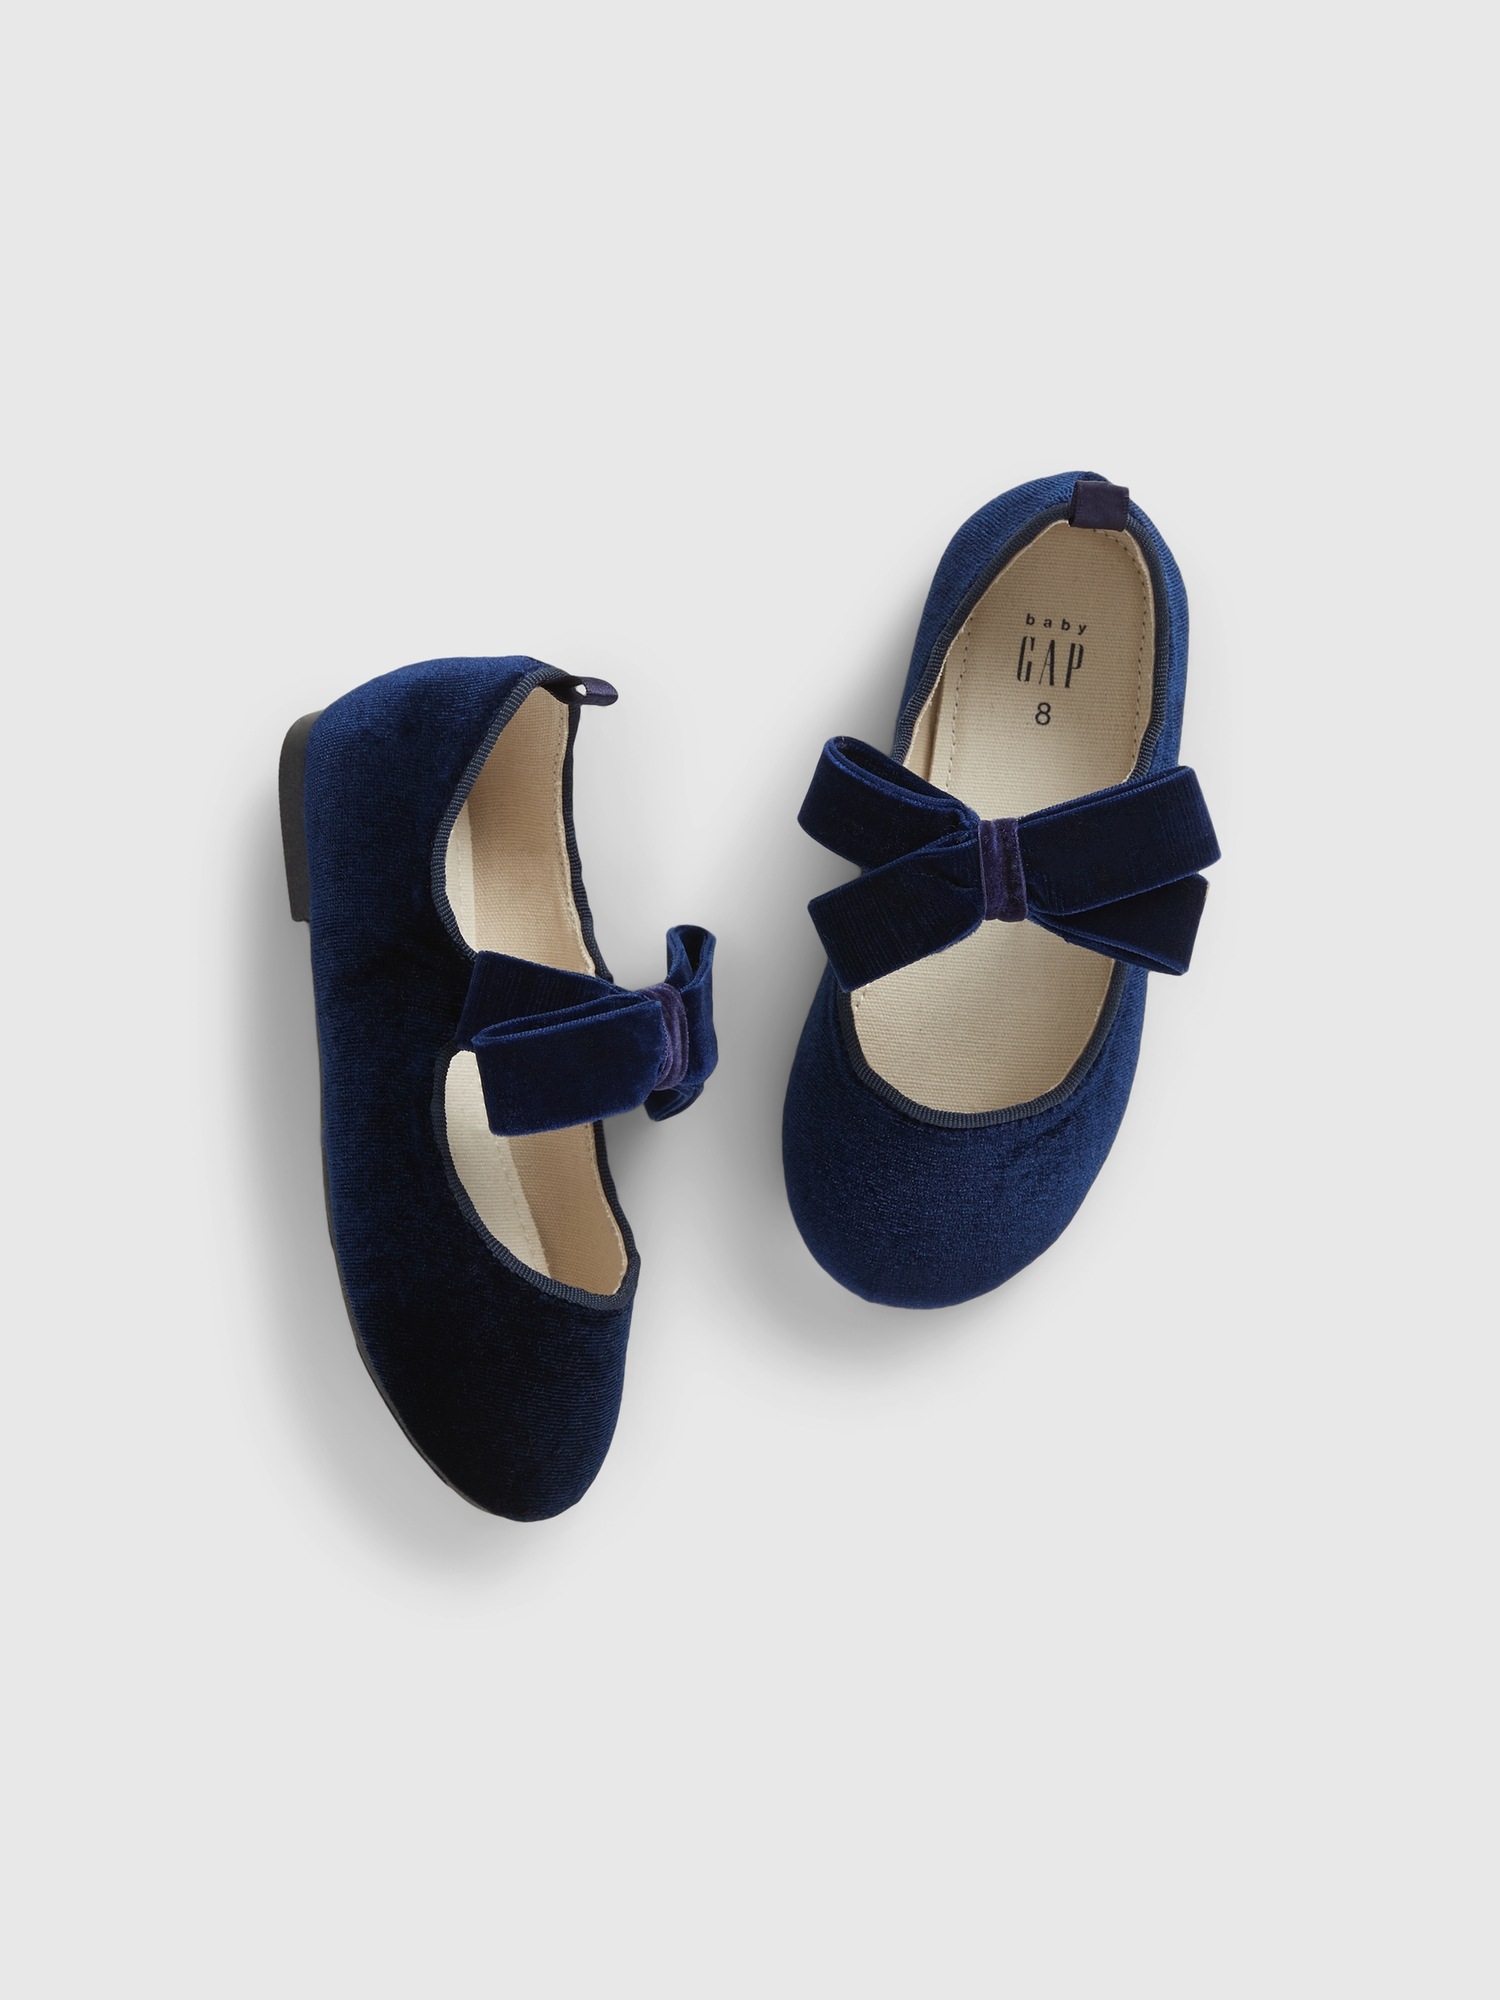 ballet pumps for toddlers